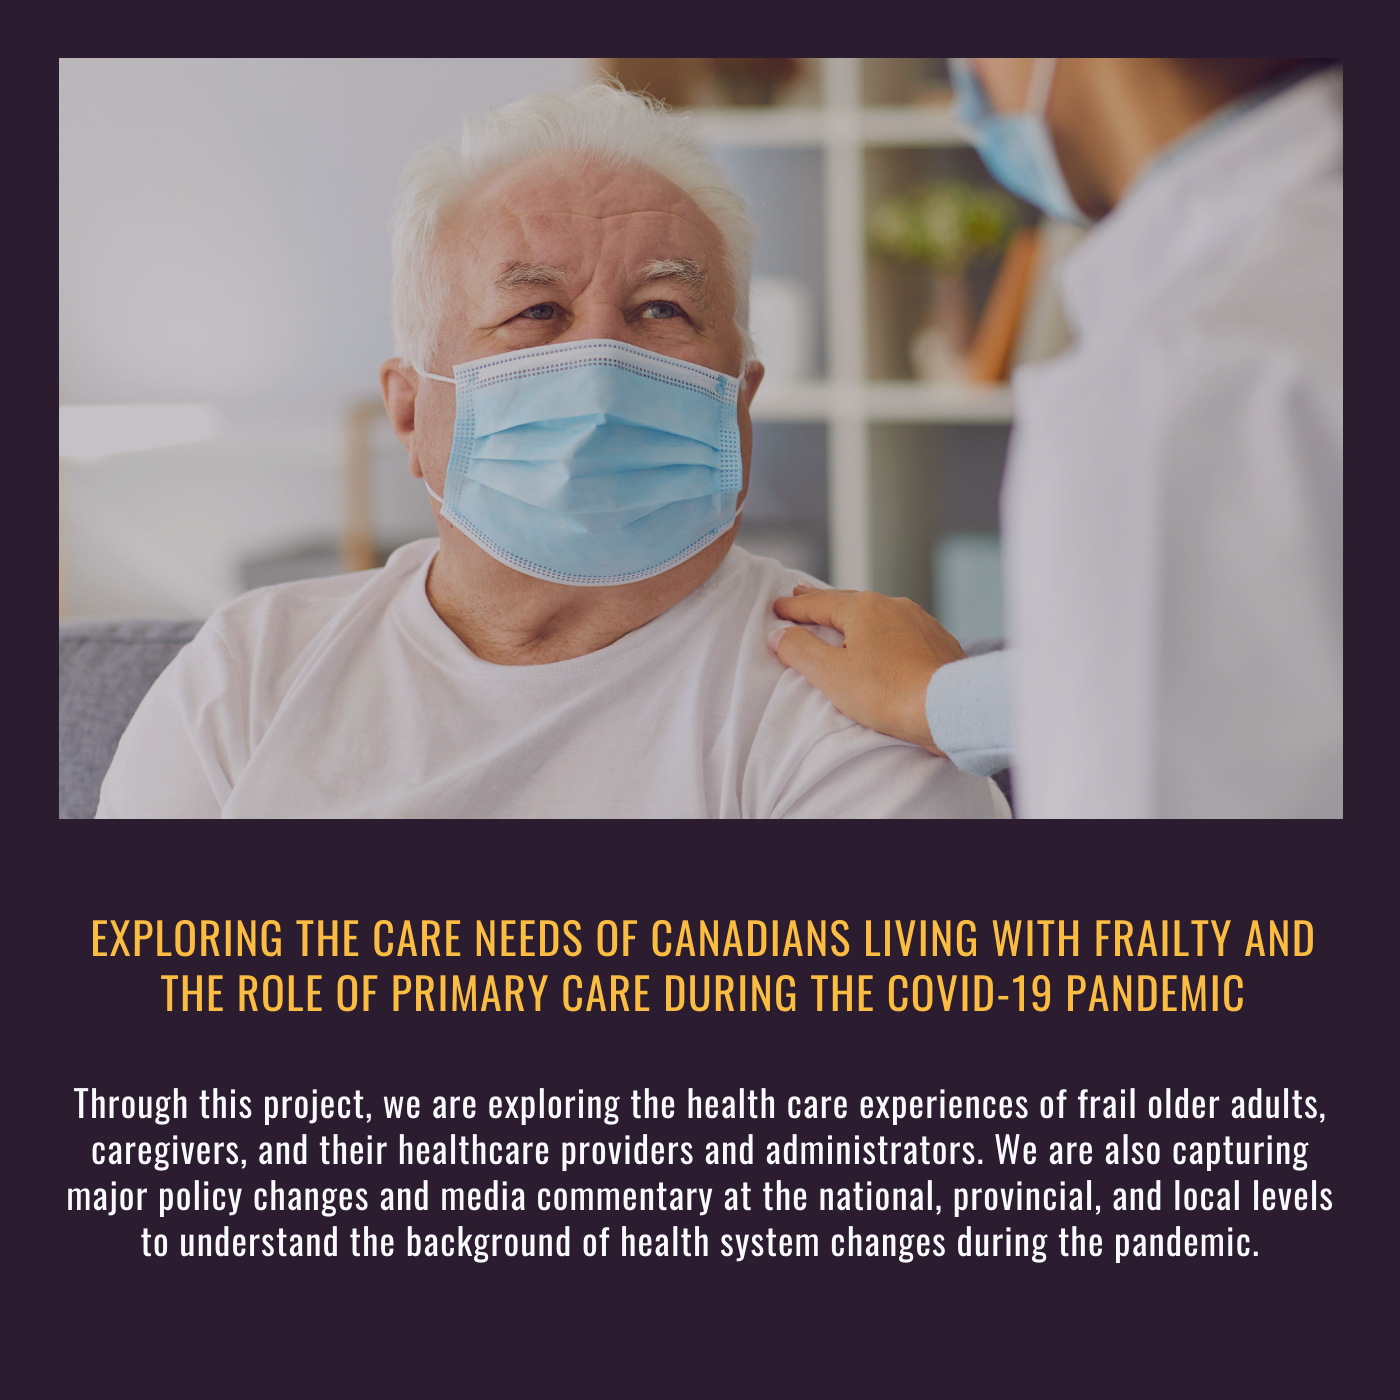 Exploring the care needs of Canadians living with frailty and the role of primary care during the COVID-19 pandemic. Through this project, we are exploring the health care experiences of frail older adults, caregivers, and their healthcare providers and administrators. We are also capturing major policy changes and media commentary at the national, provincial, and local levels to understand the background of health system changes during the pandemic.  Picture of an older man in a medical mask looking up at a person in a medical mask who has their hand on his shoulder